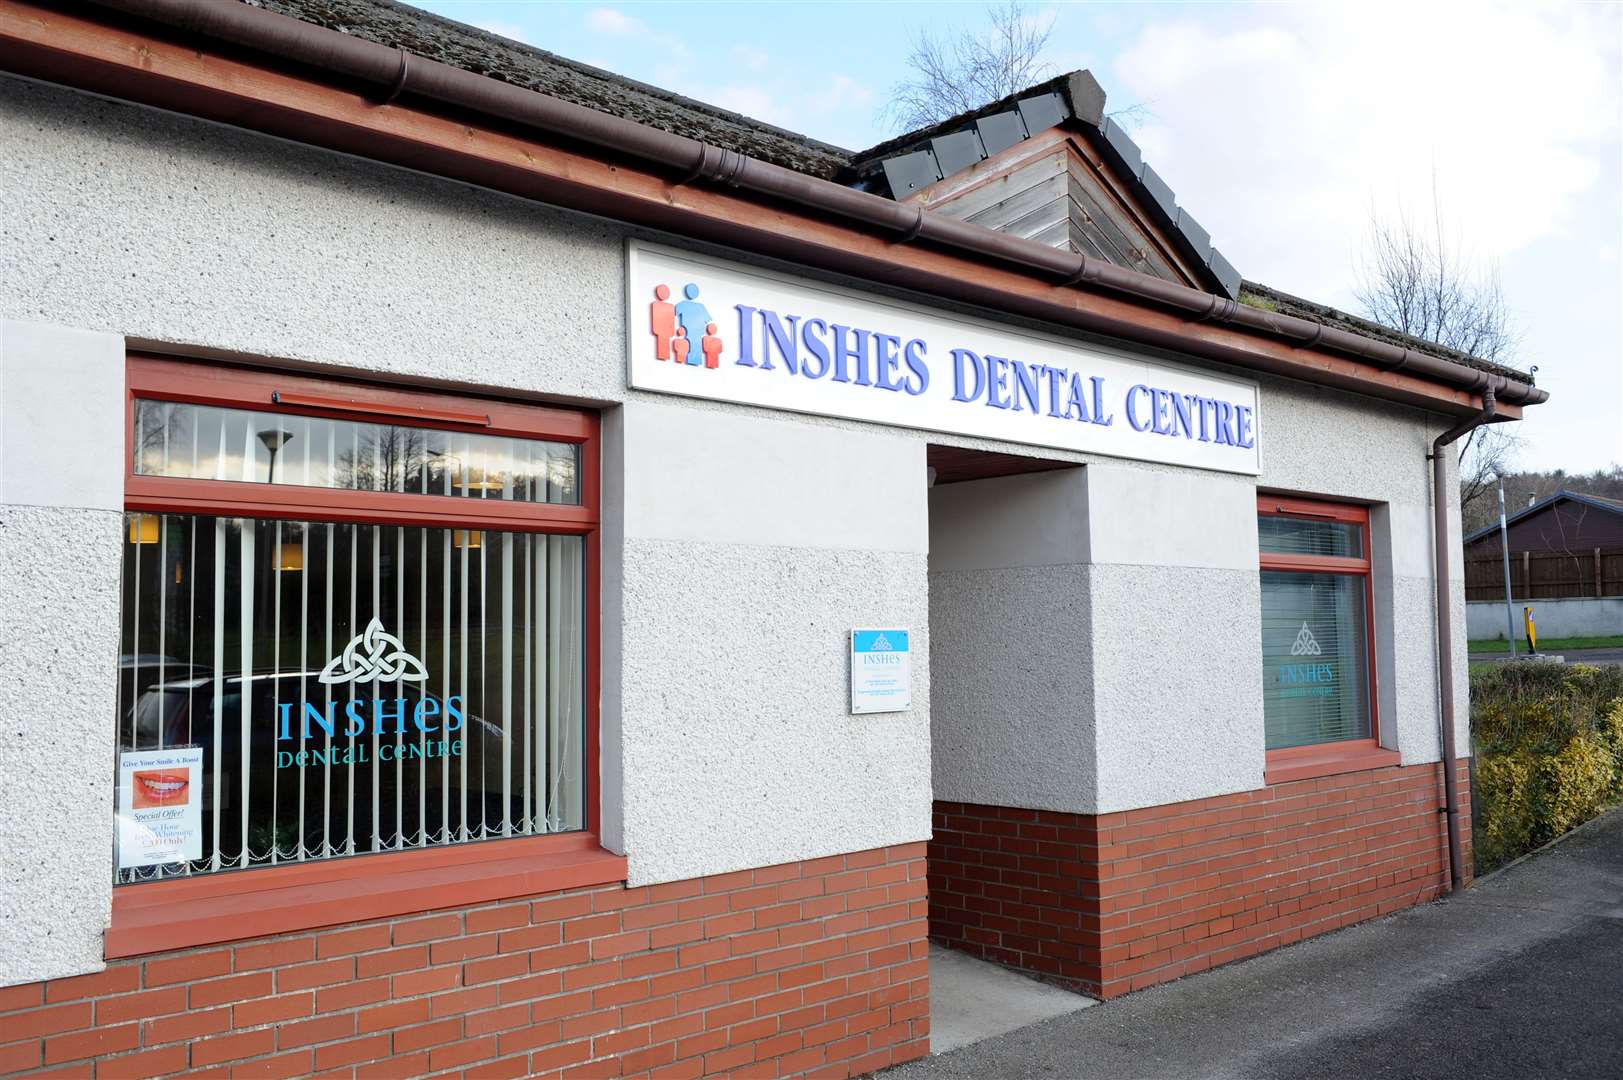 Inshes Dental Centre in Inverness says it has unexpected staff vacancies.